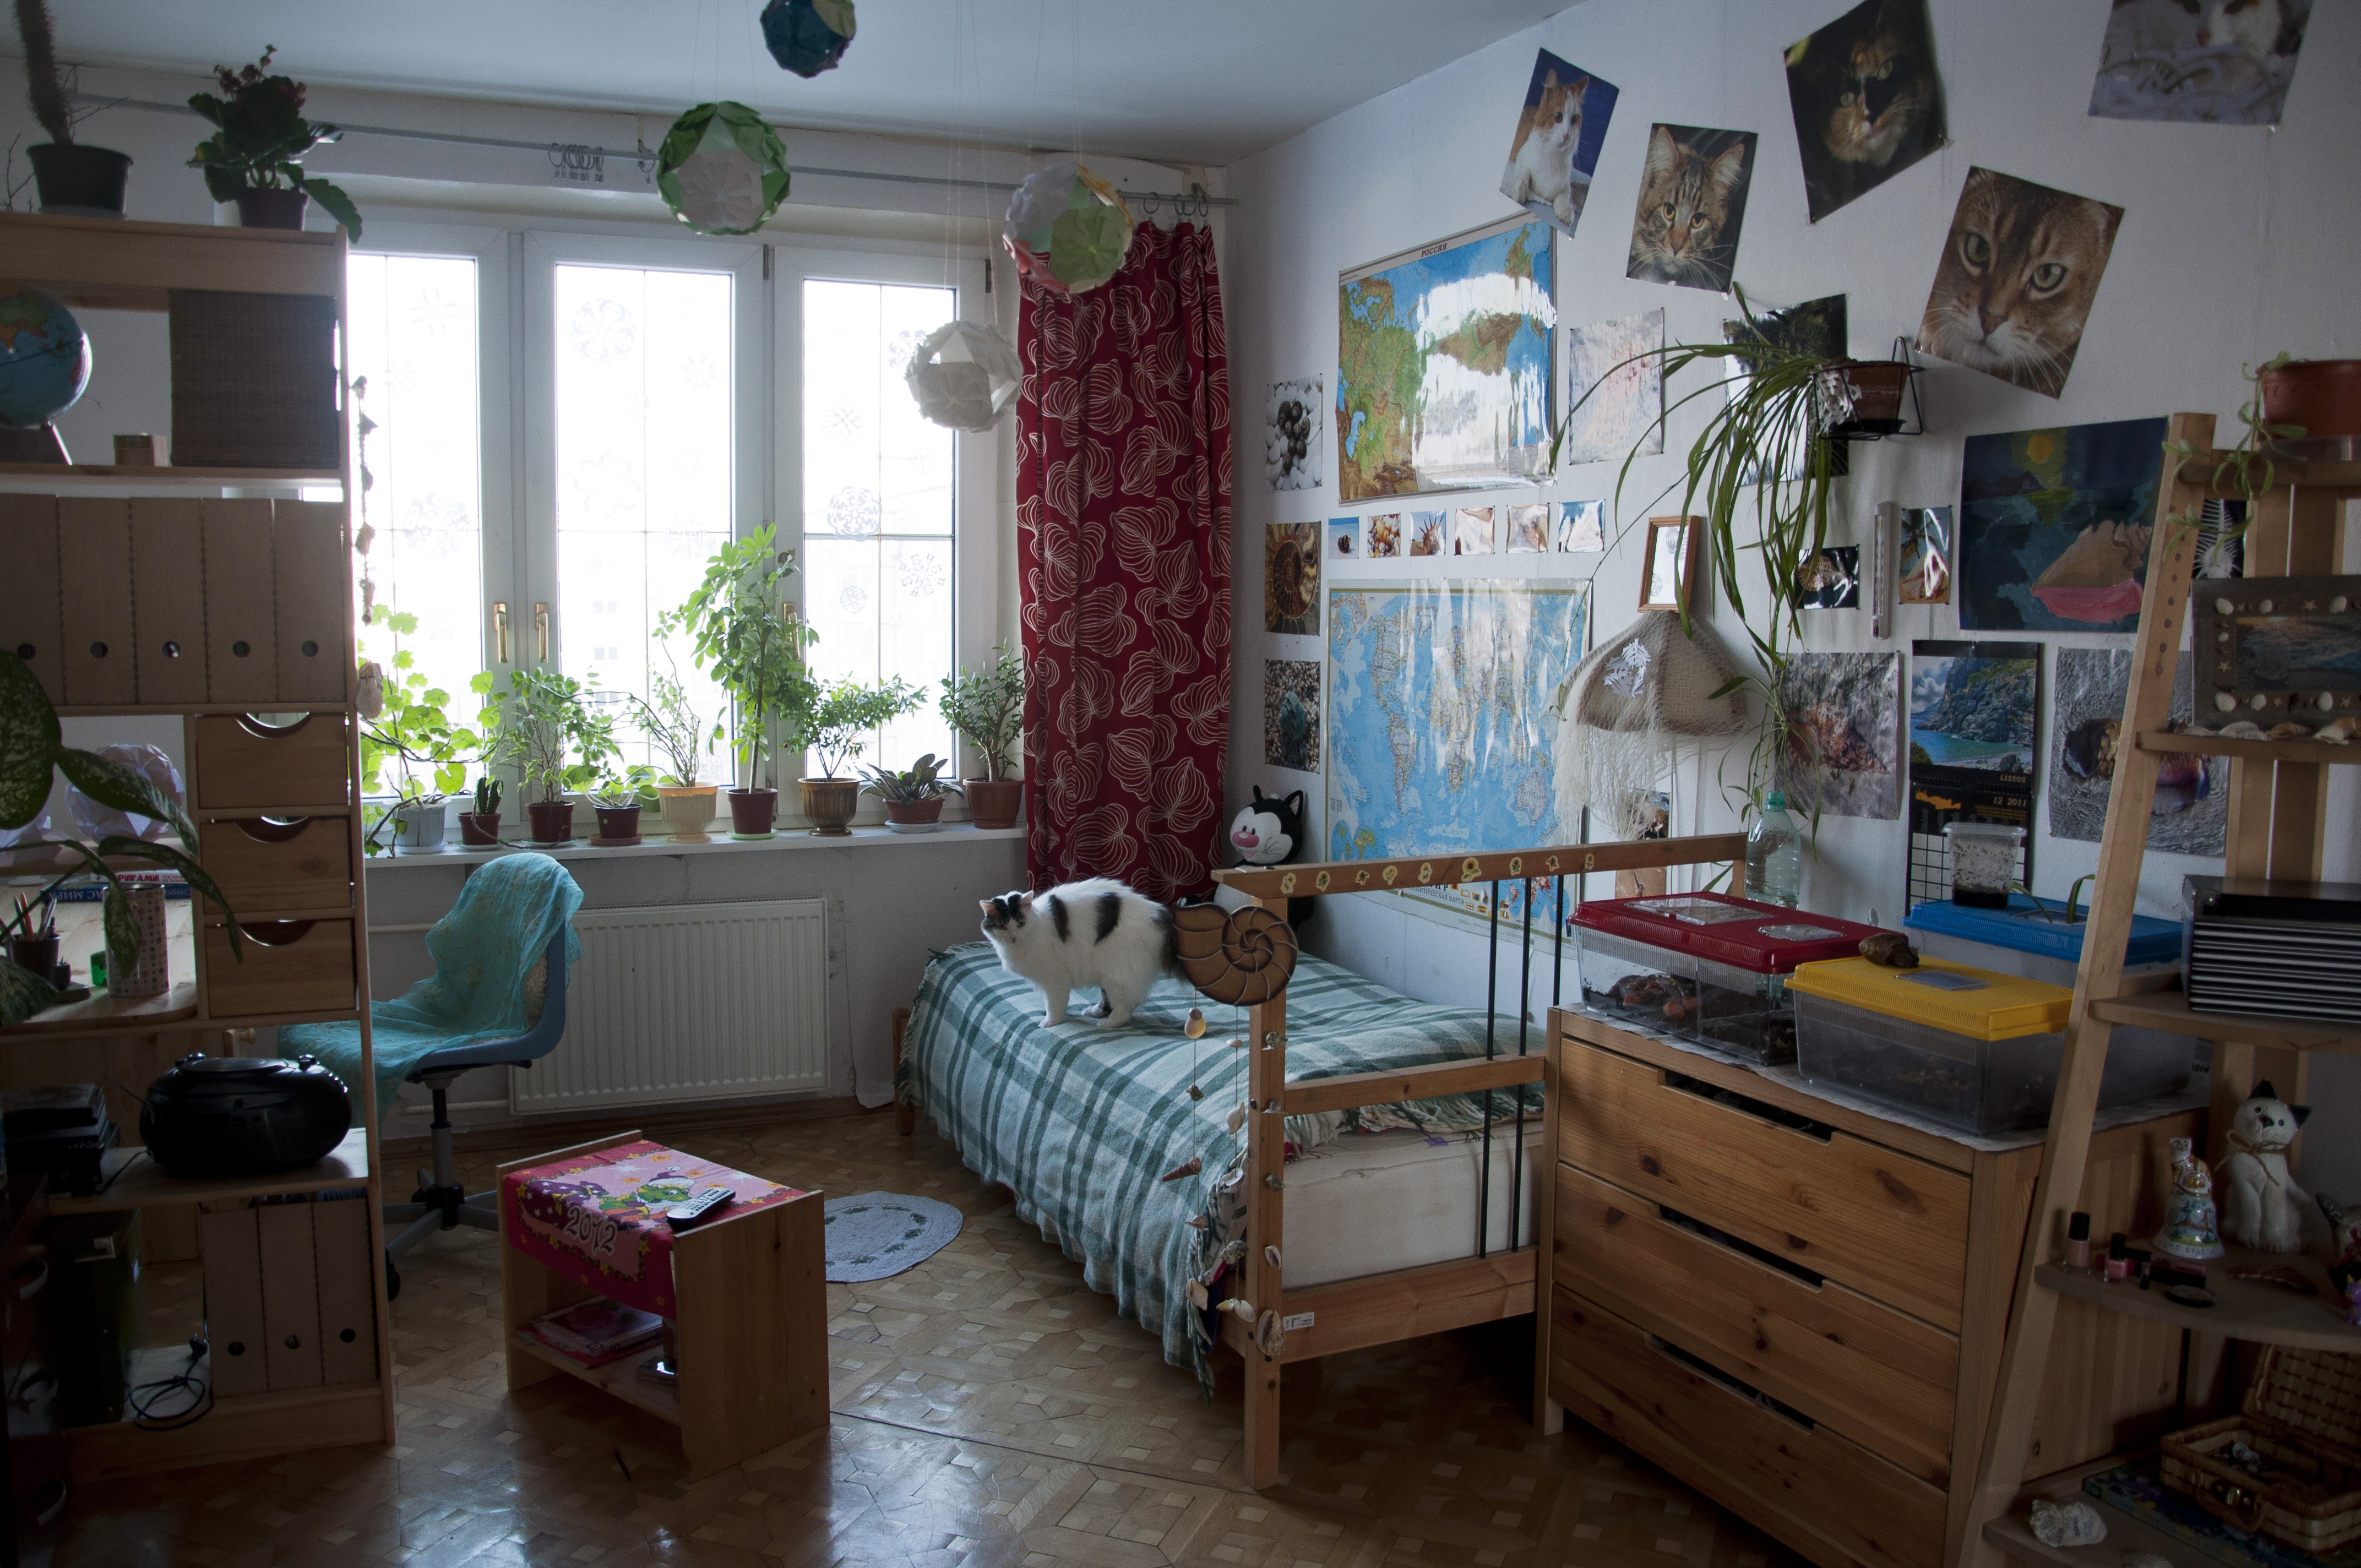 bedroom of Russian woman, with cat, and pictures on walls